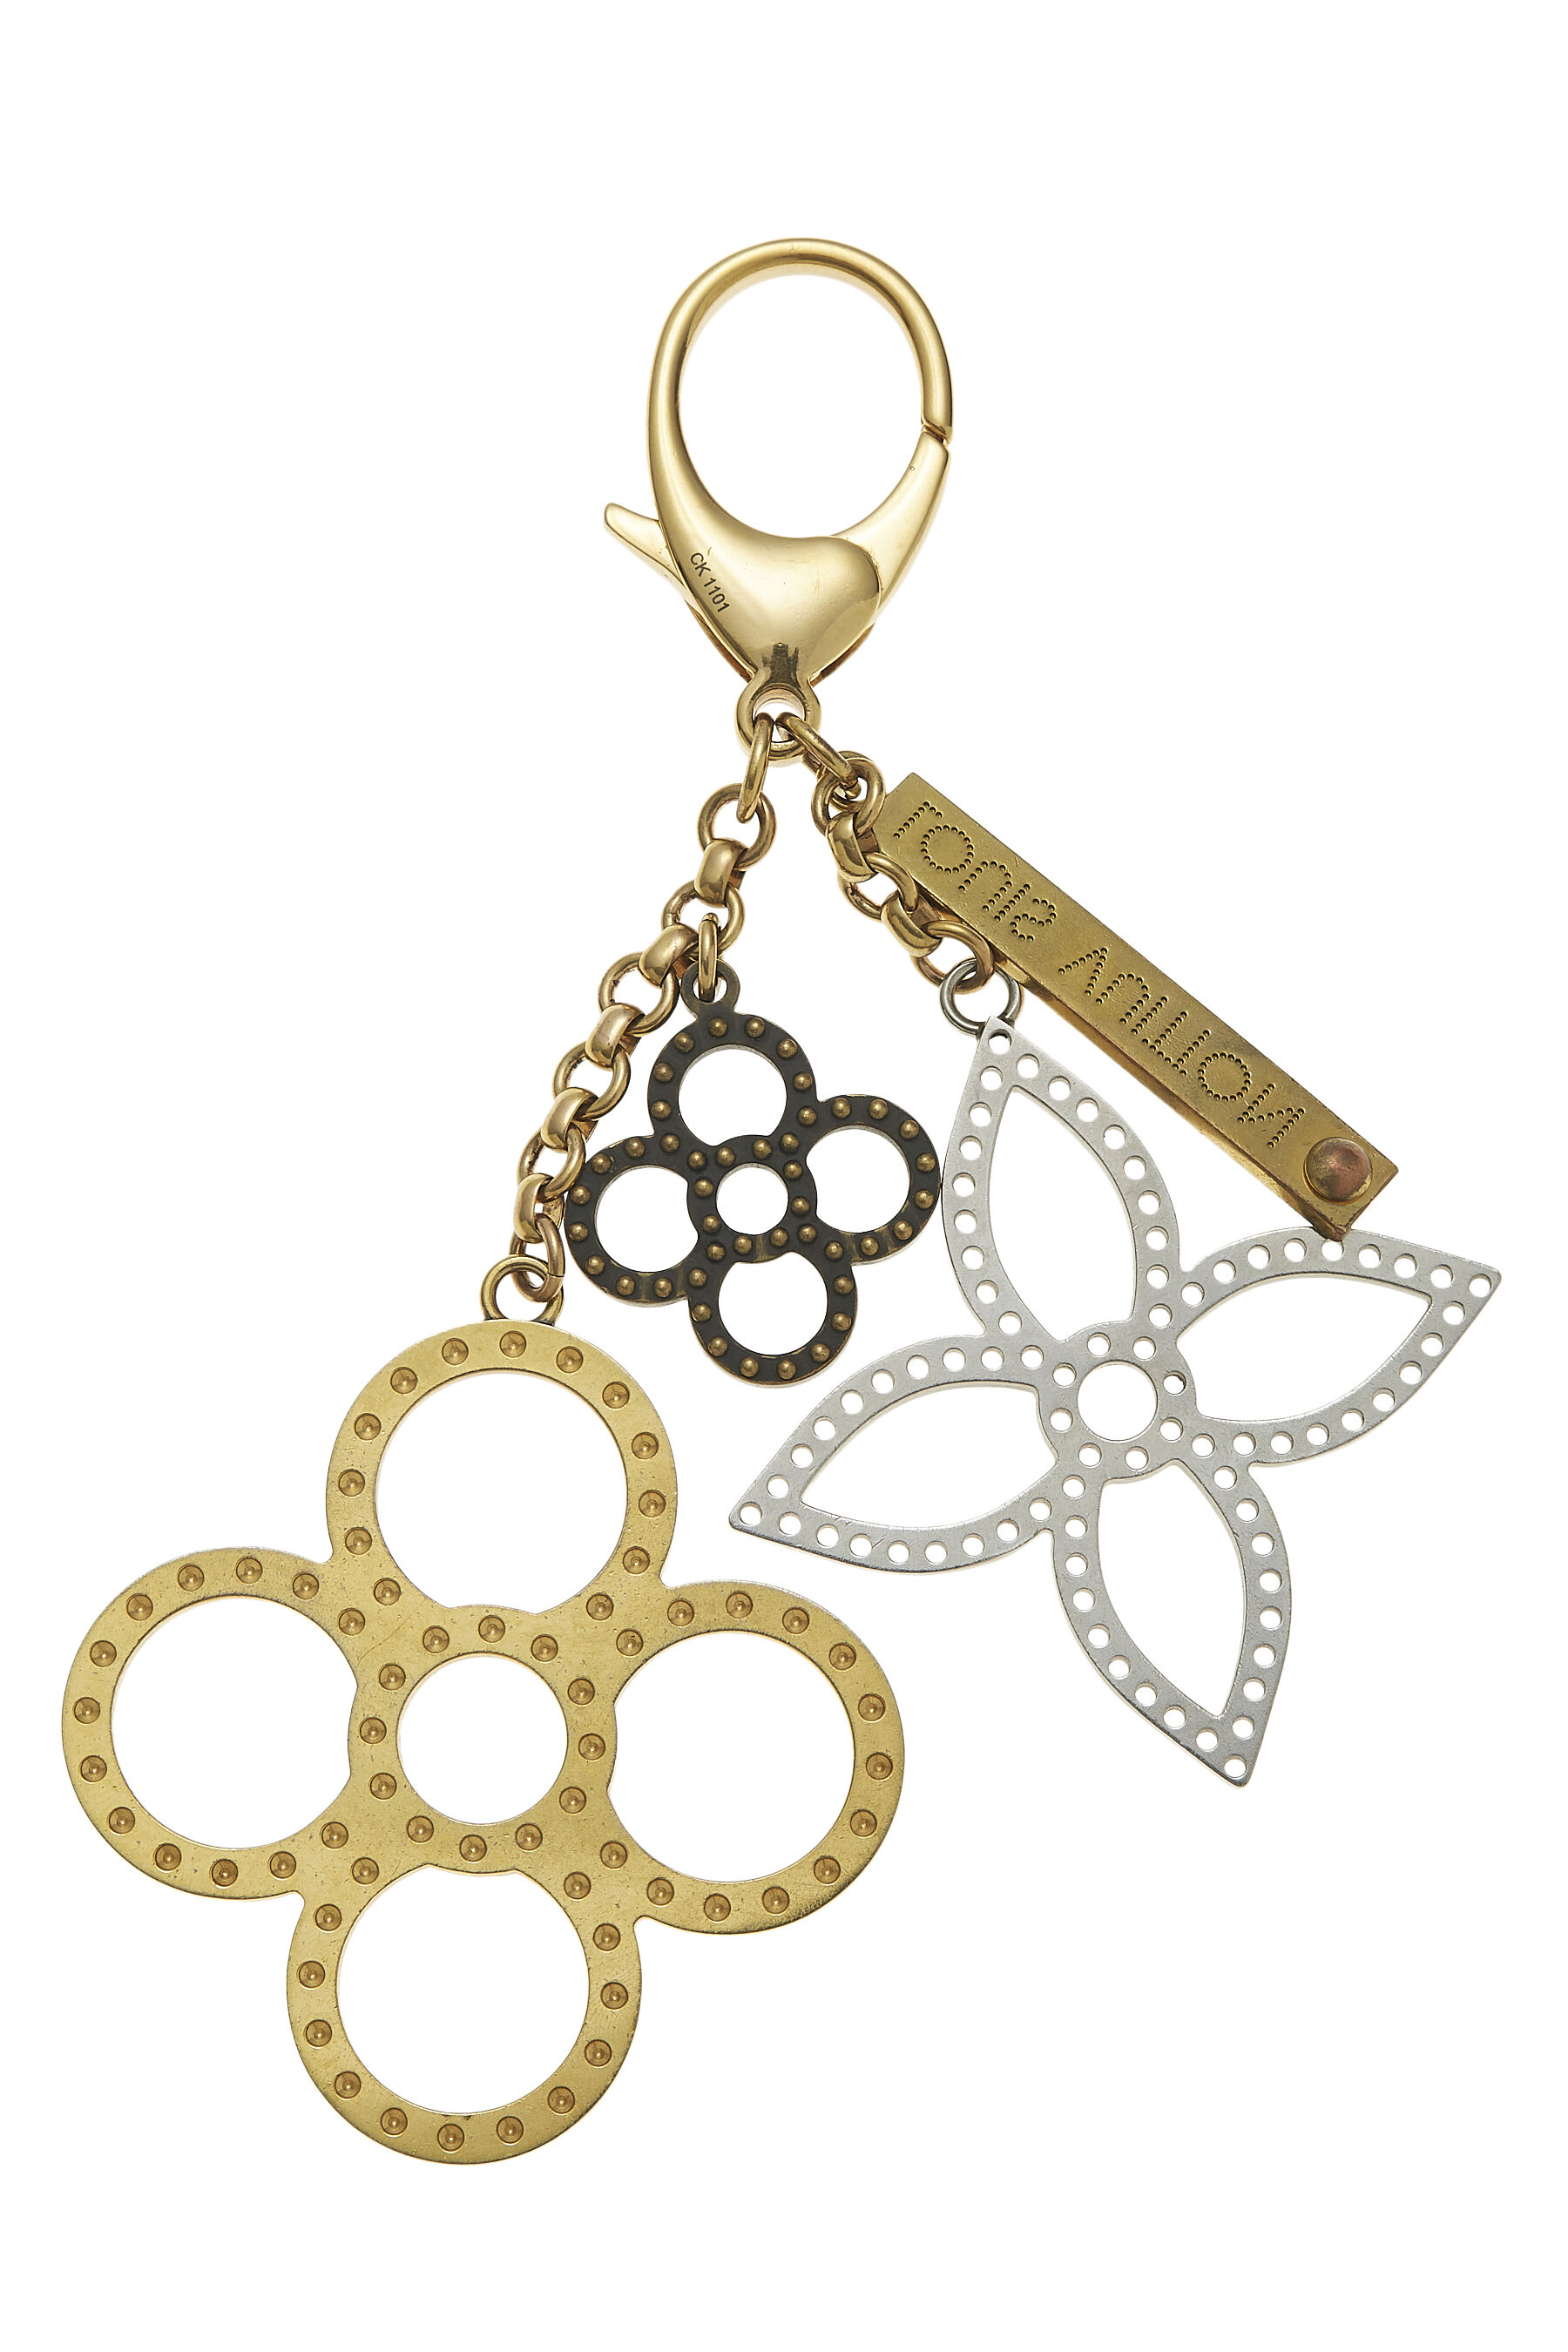 Shop Louis Vuitton Keychains & Bag Charms (M01350) by aya-guilera